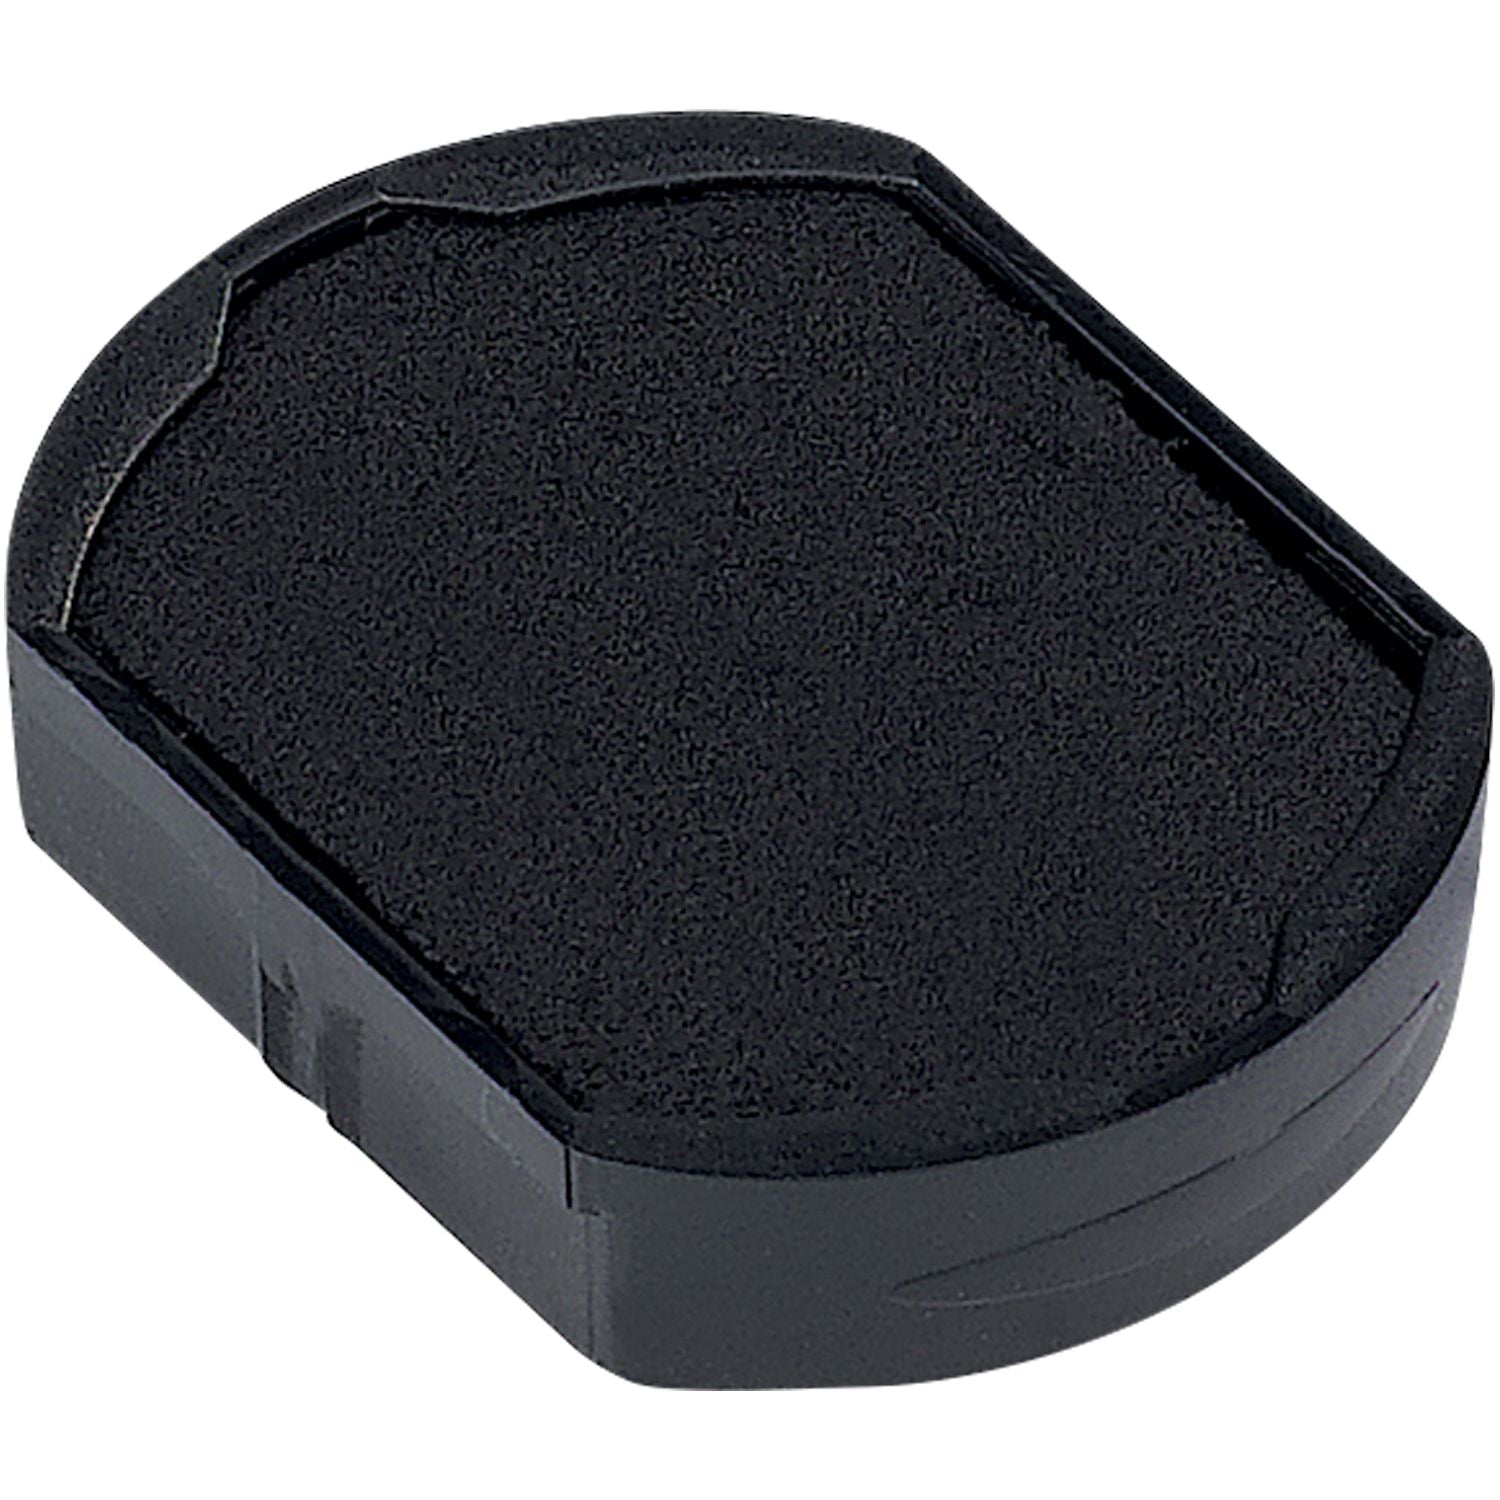 One Color Replacement Ink Pad For 46119 Trodat Black